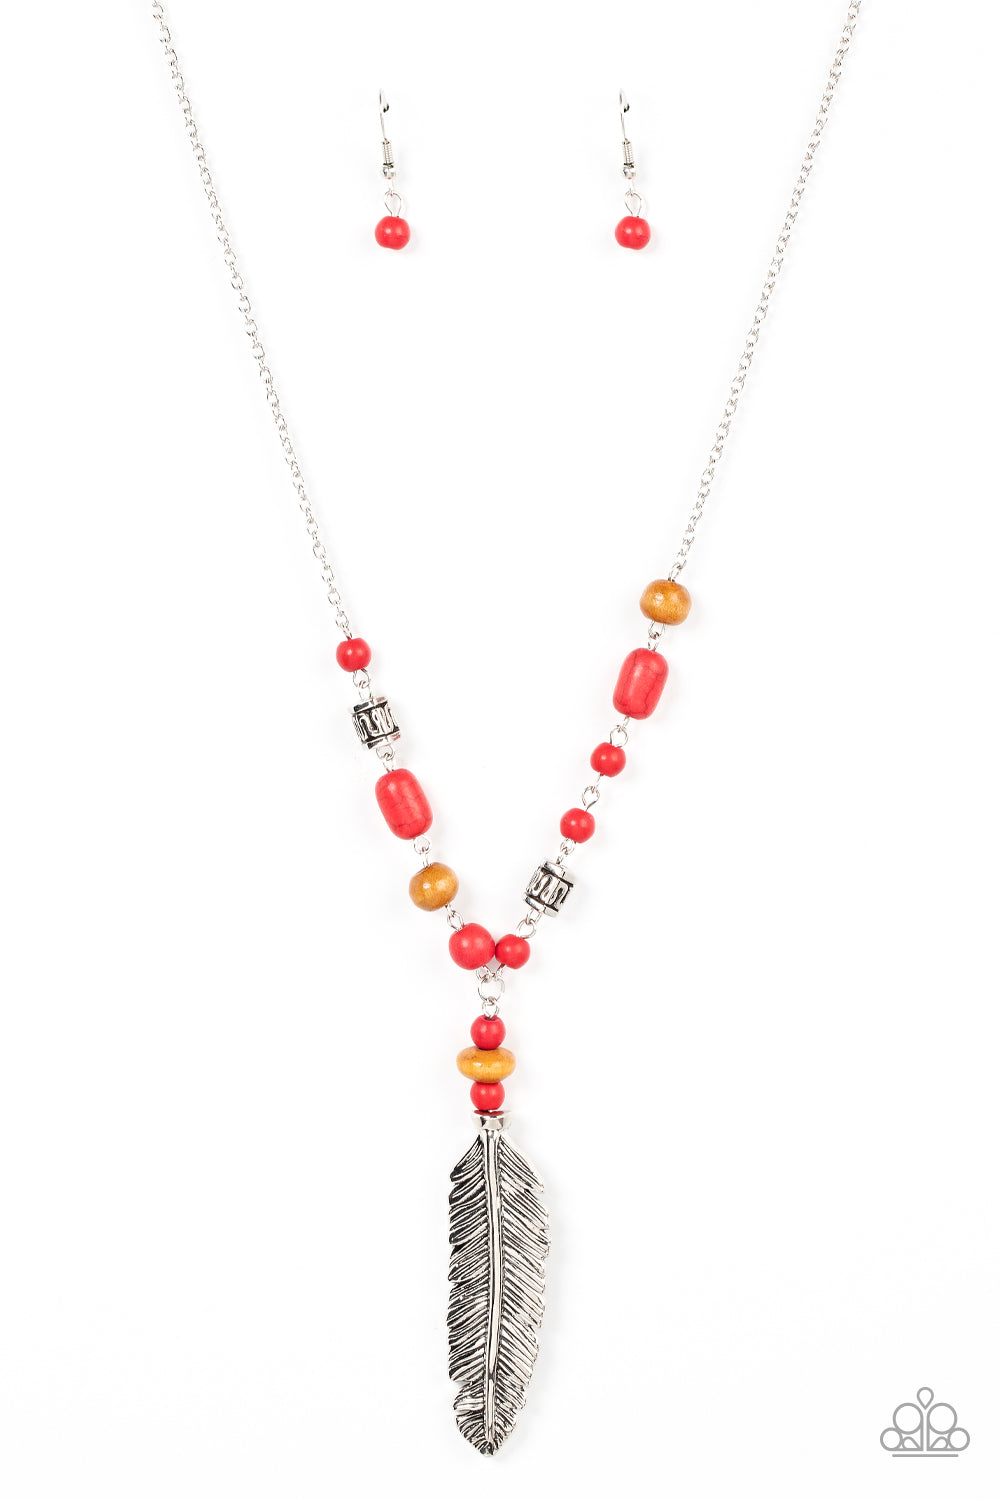 Watch Me Fly - red - Paparazzi necklace